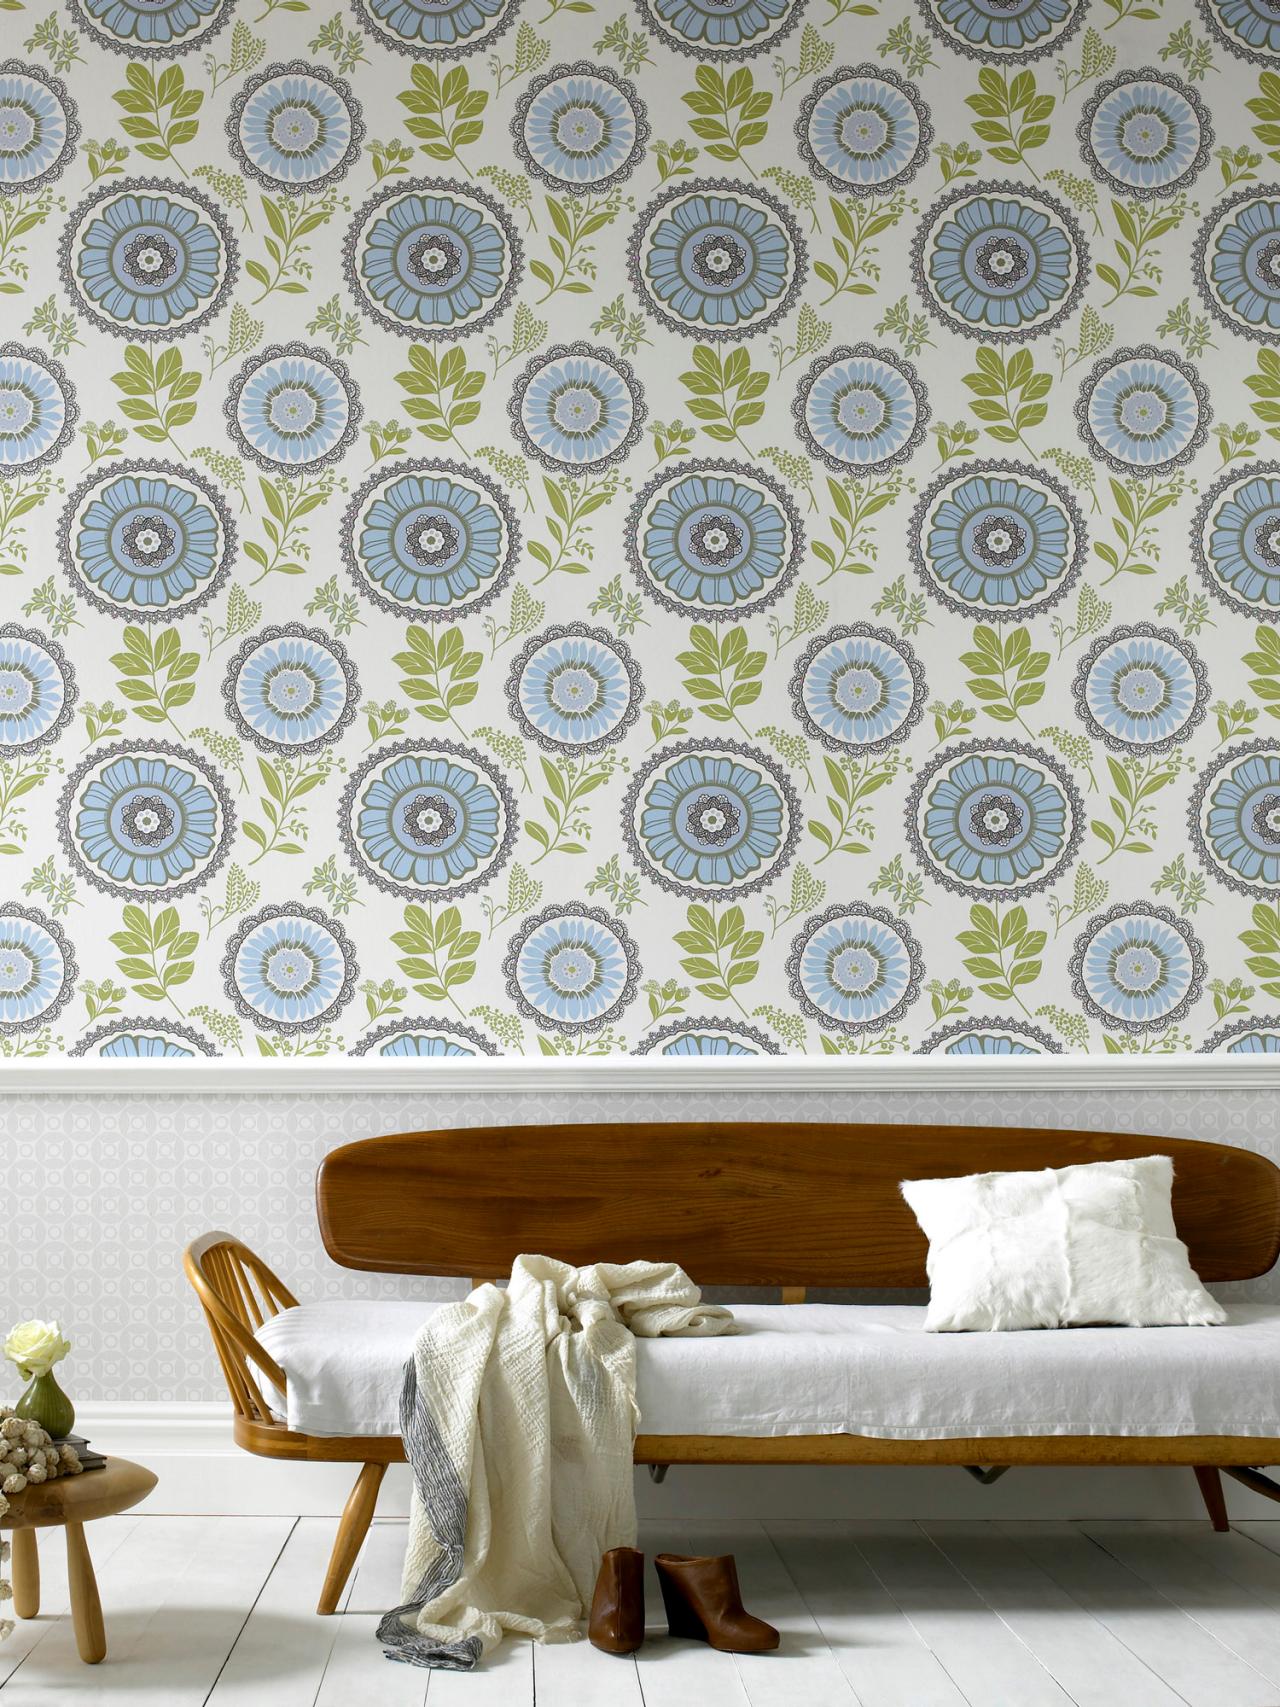 Delicate Floral Wallpaper This Charming With Its